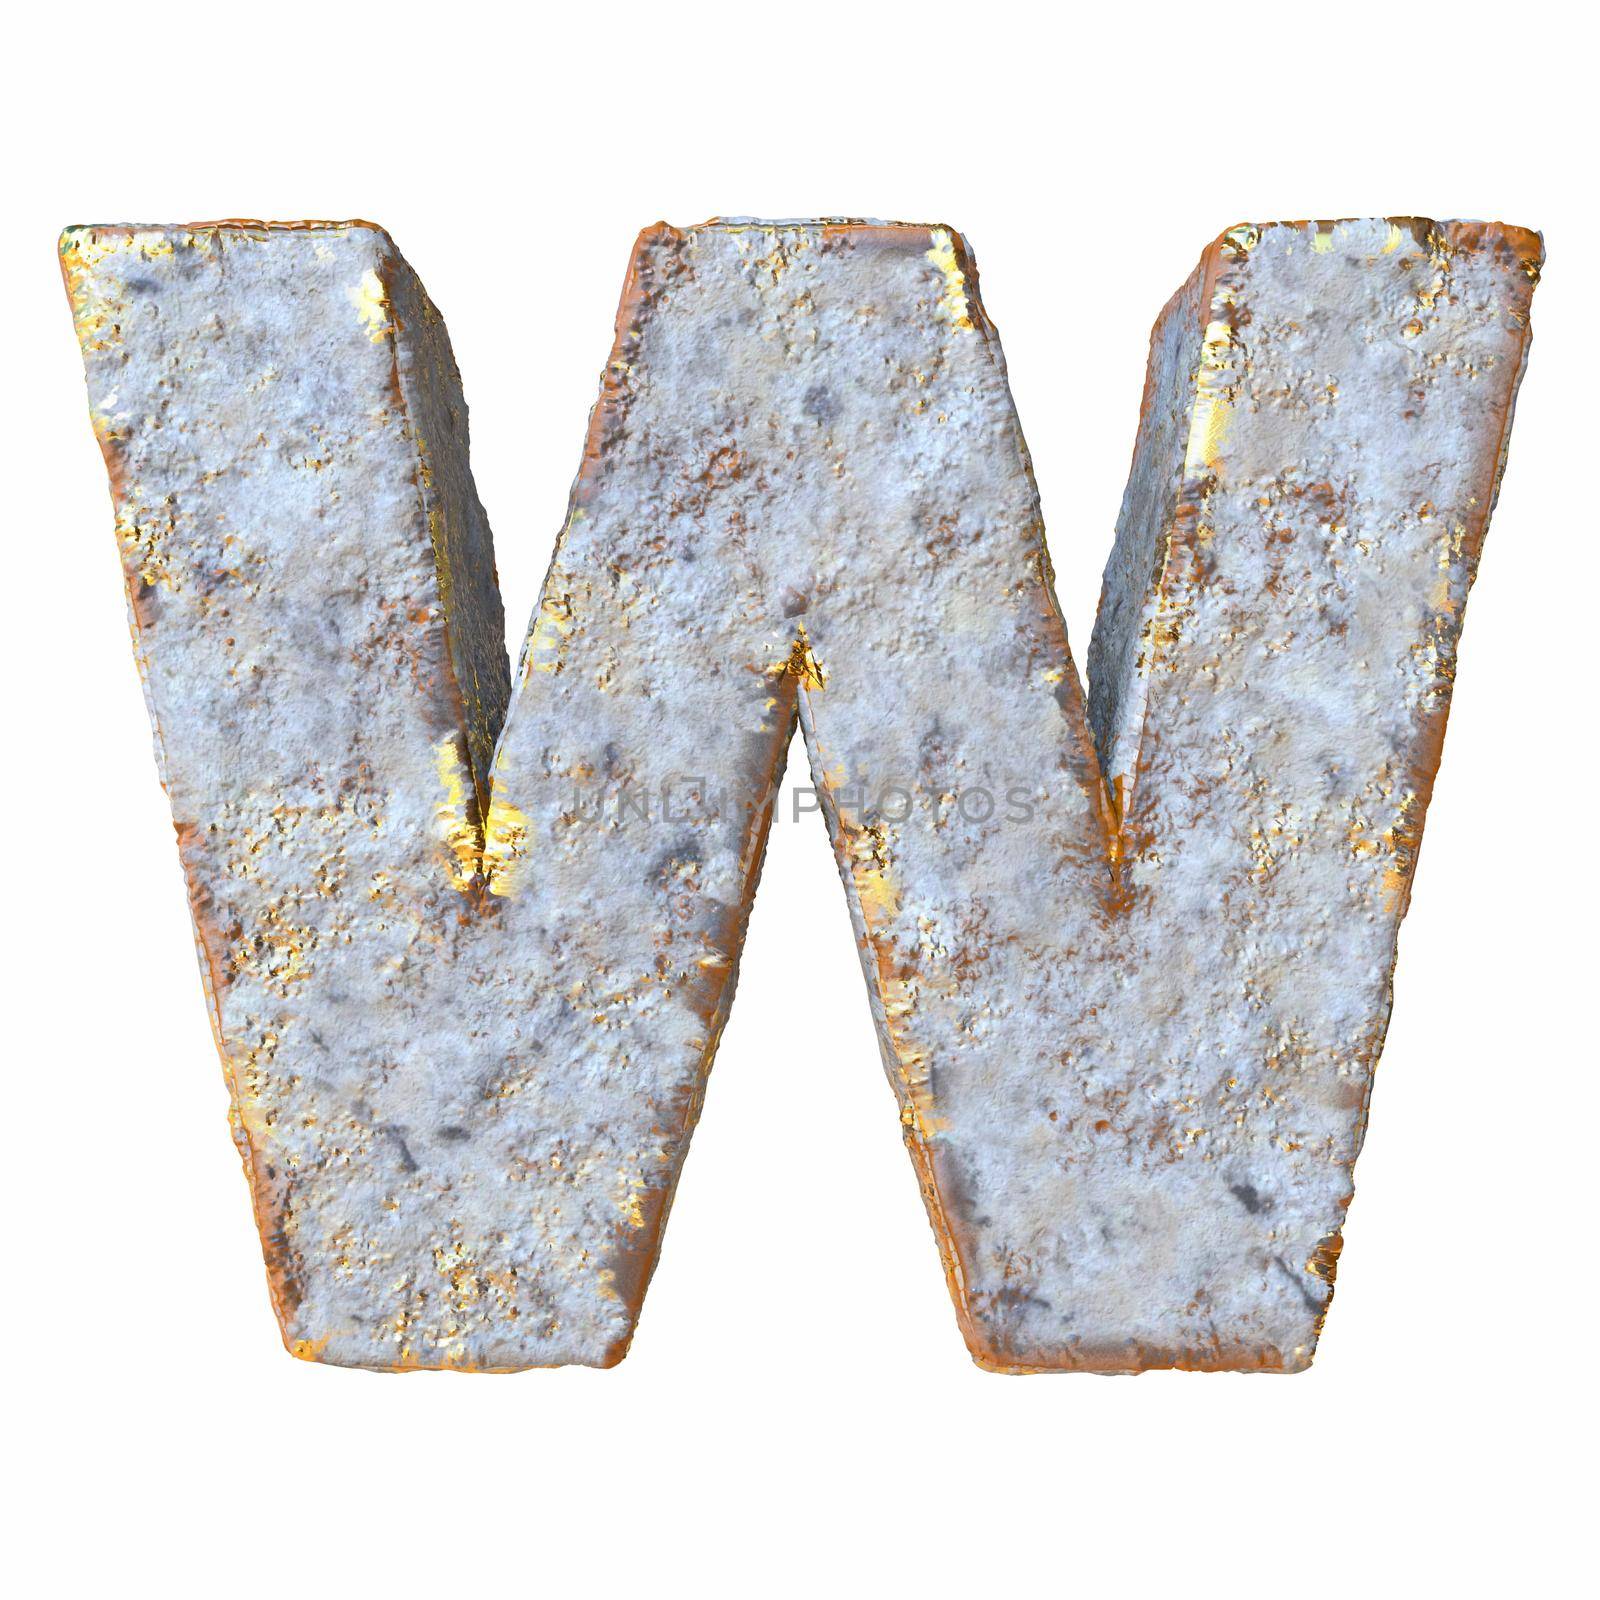 Stone with golden metal particles Letter W 3D rendering illustration isolated on white background